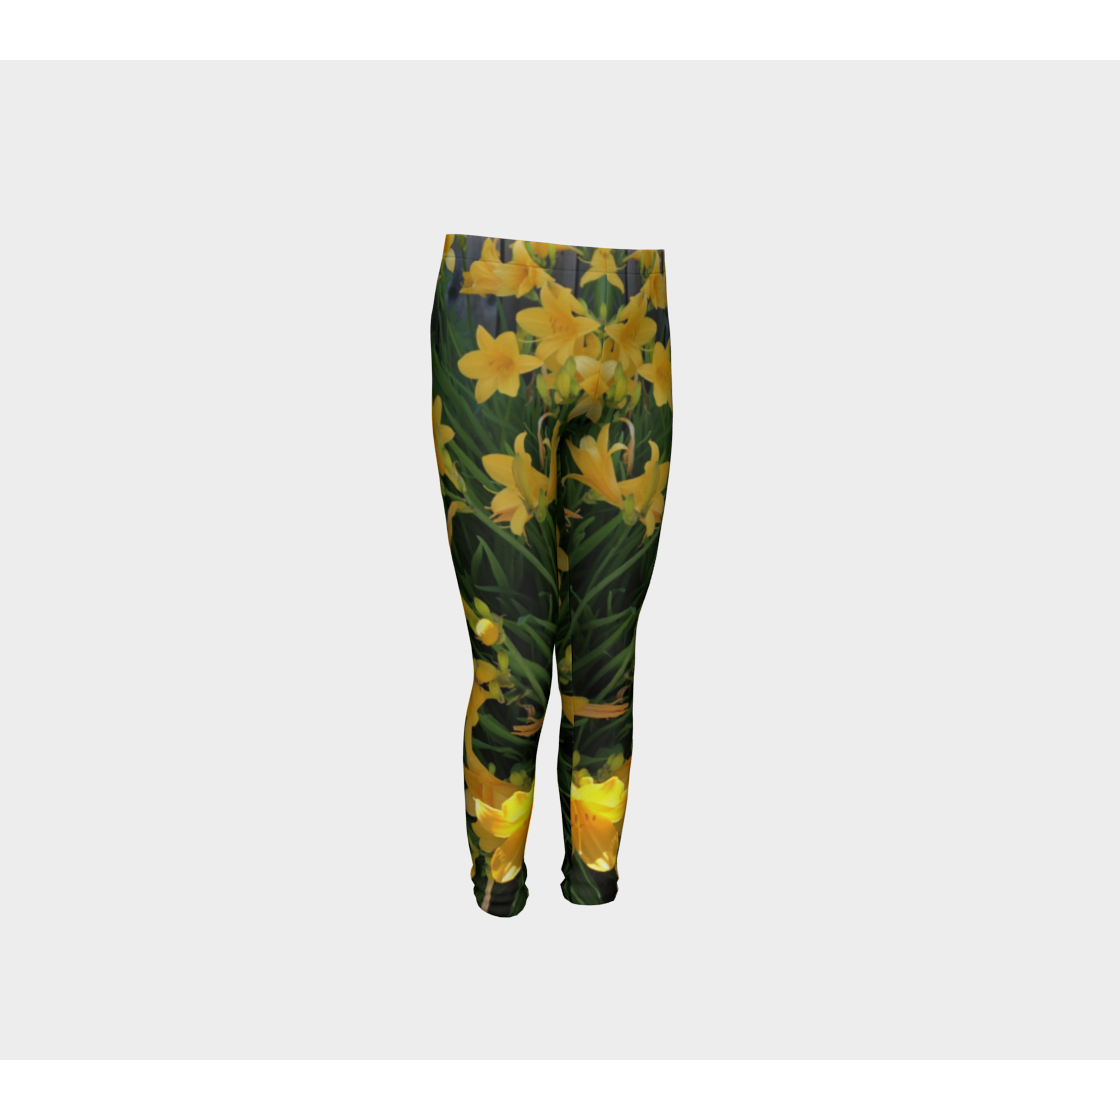 Youth Leggings for girls with: Yellow Lily Design, 4-5 years Front